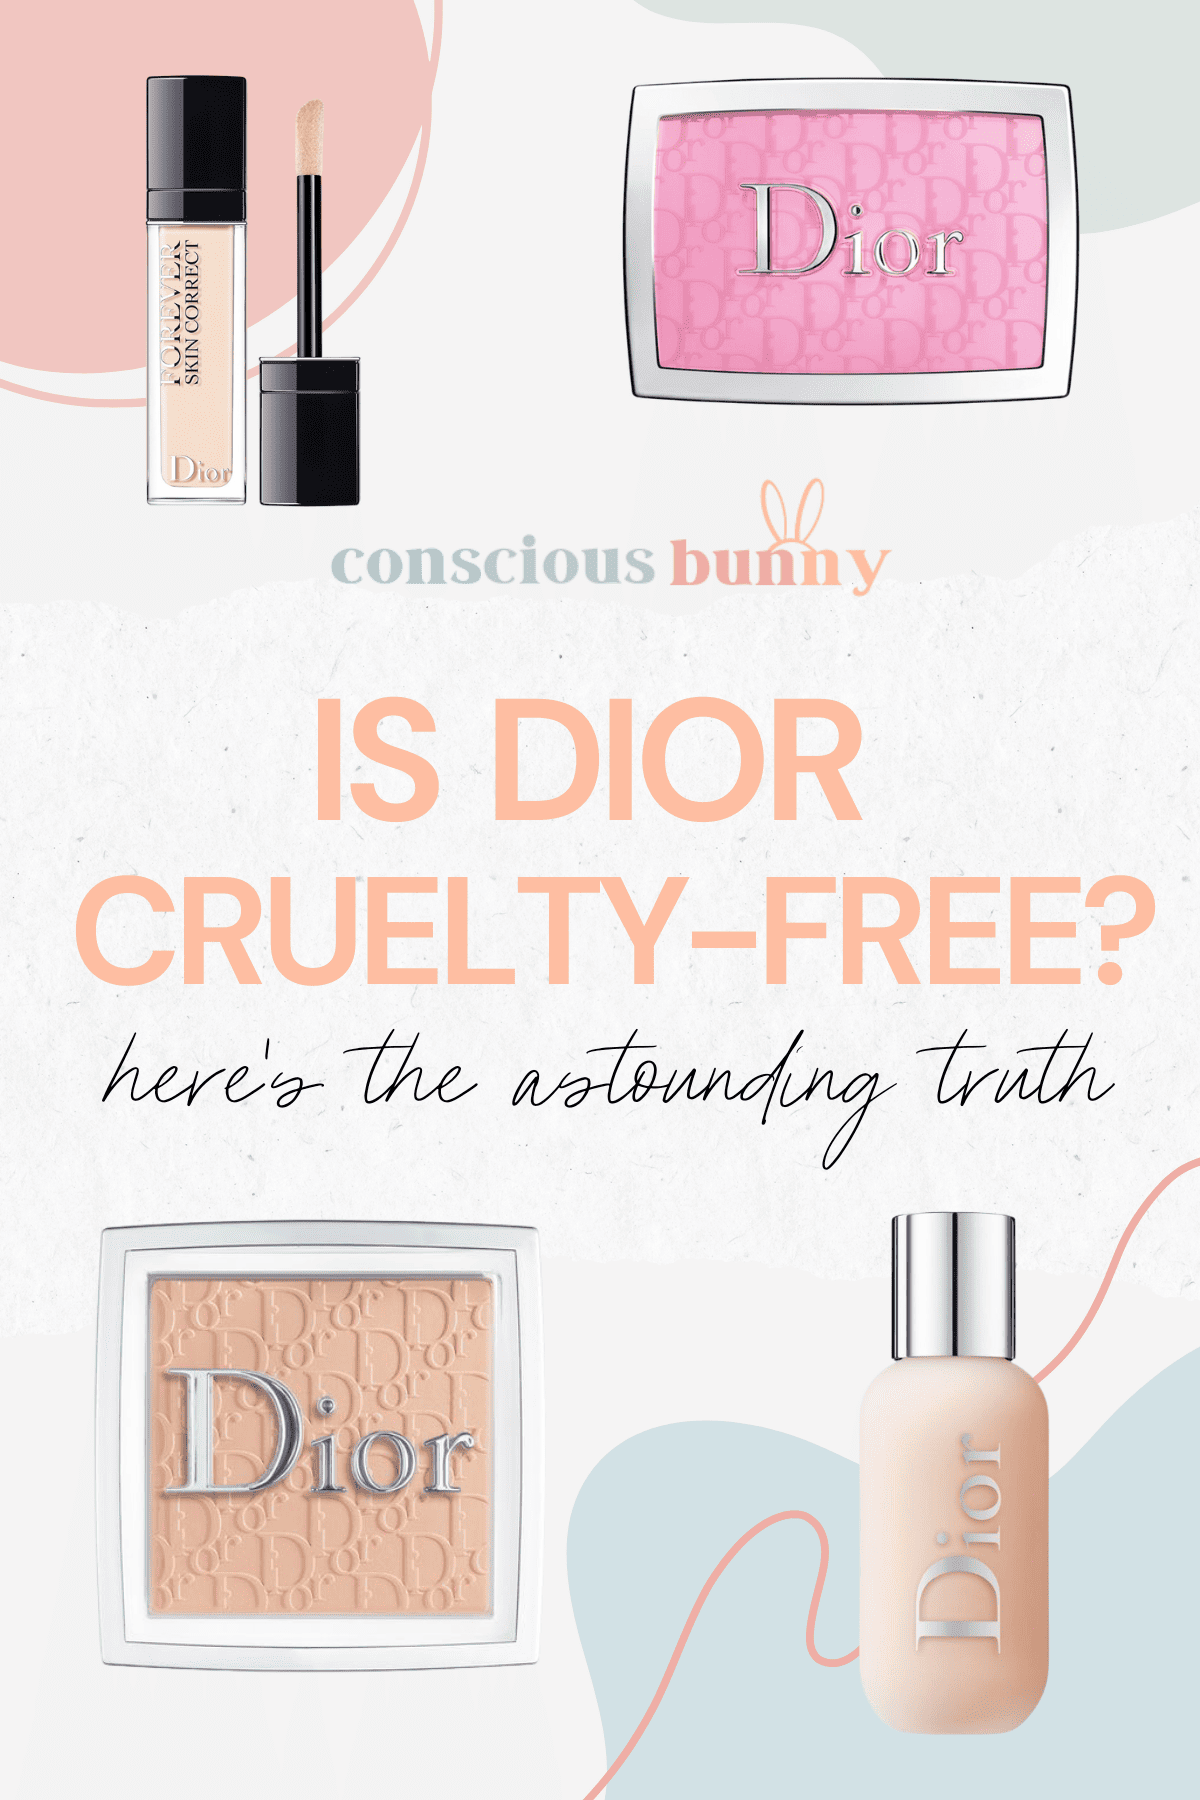 Is Makeup Forever Cruelty-Free? Here's The Astounding Truth